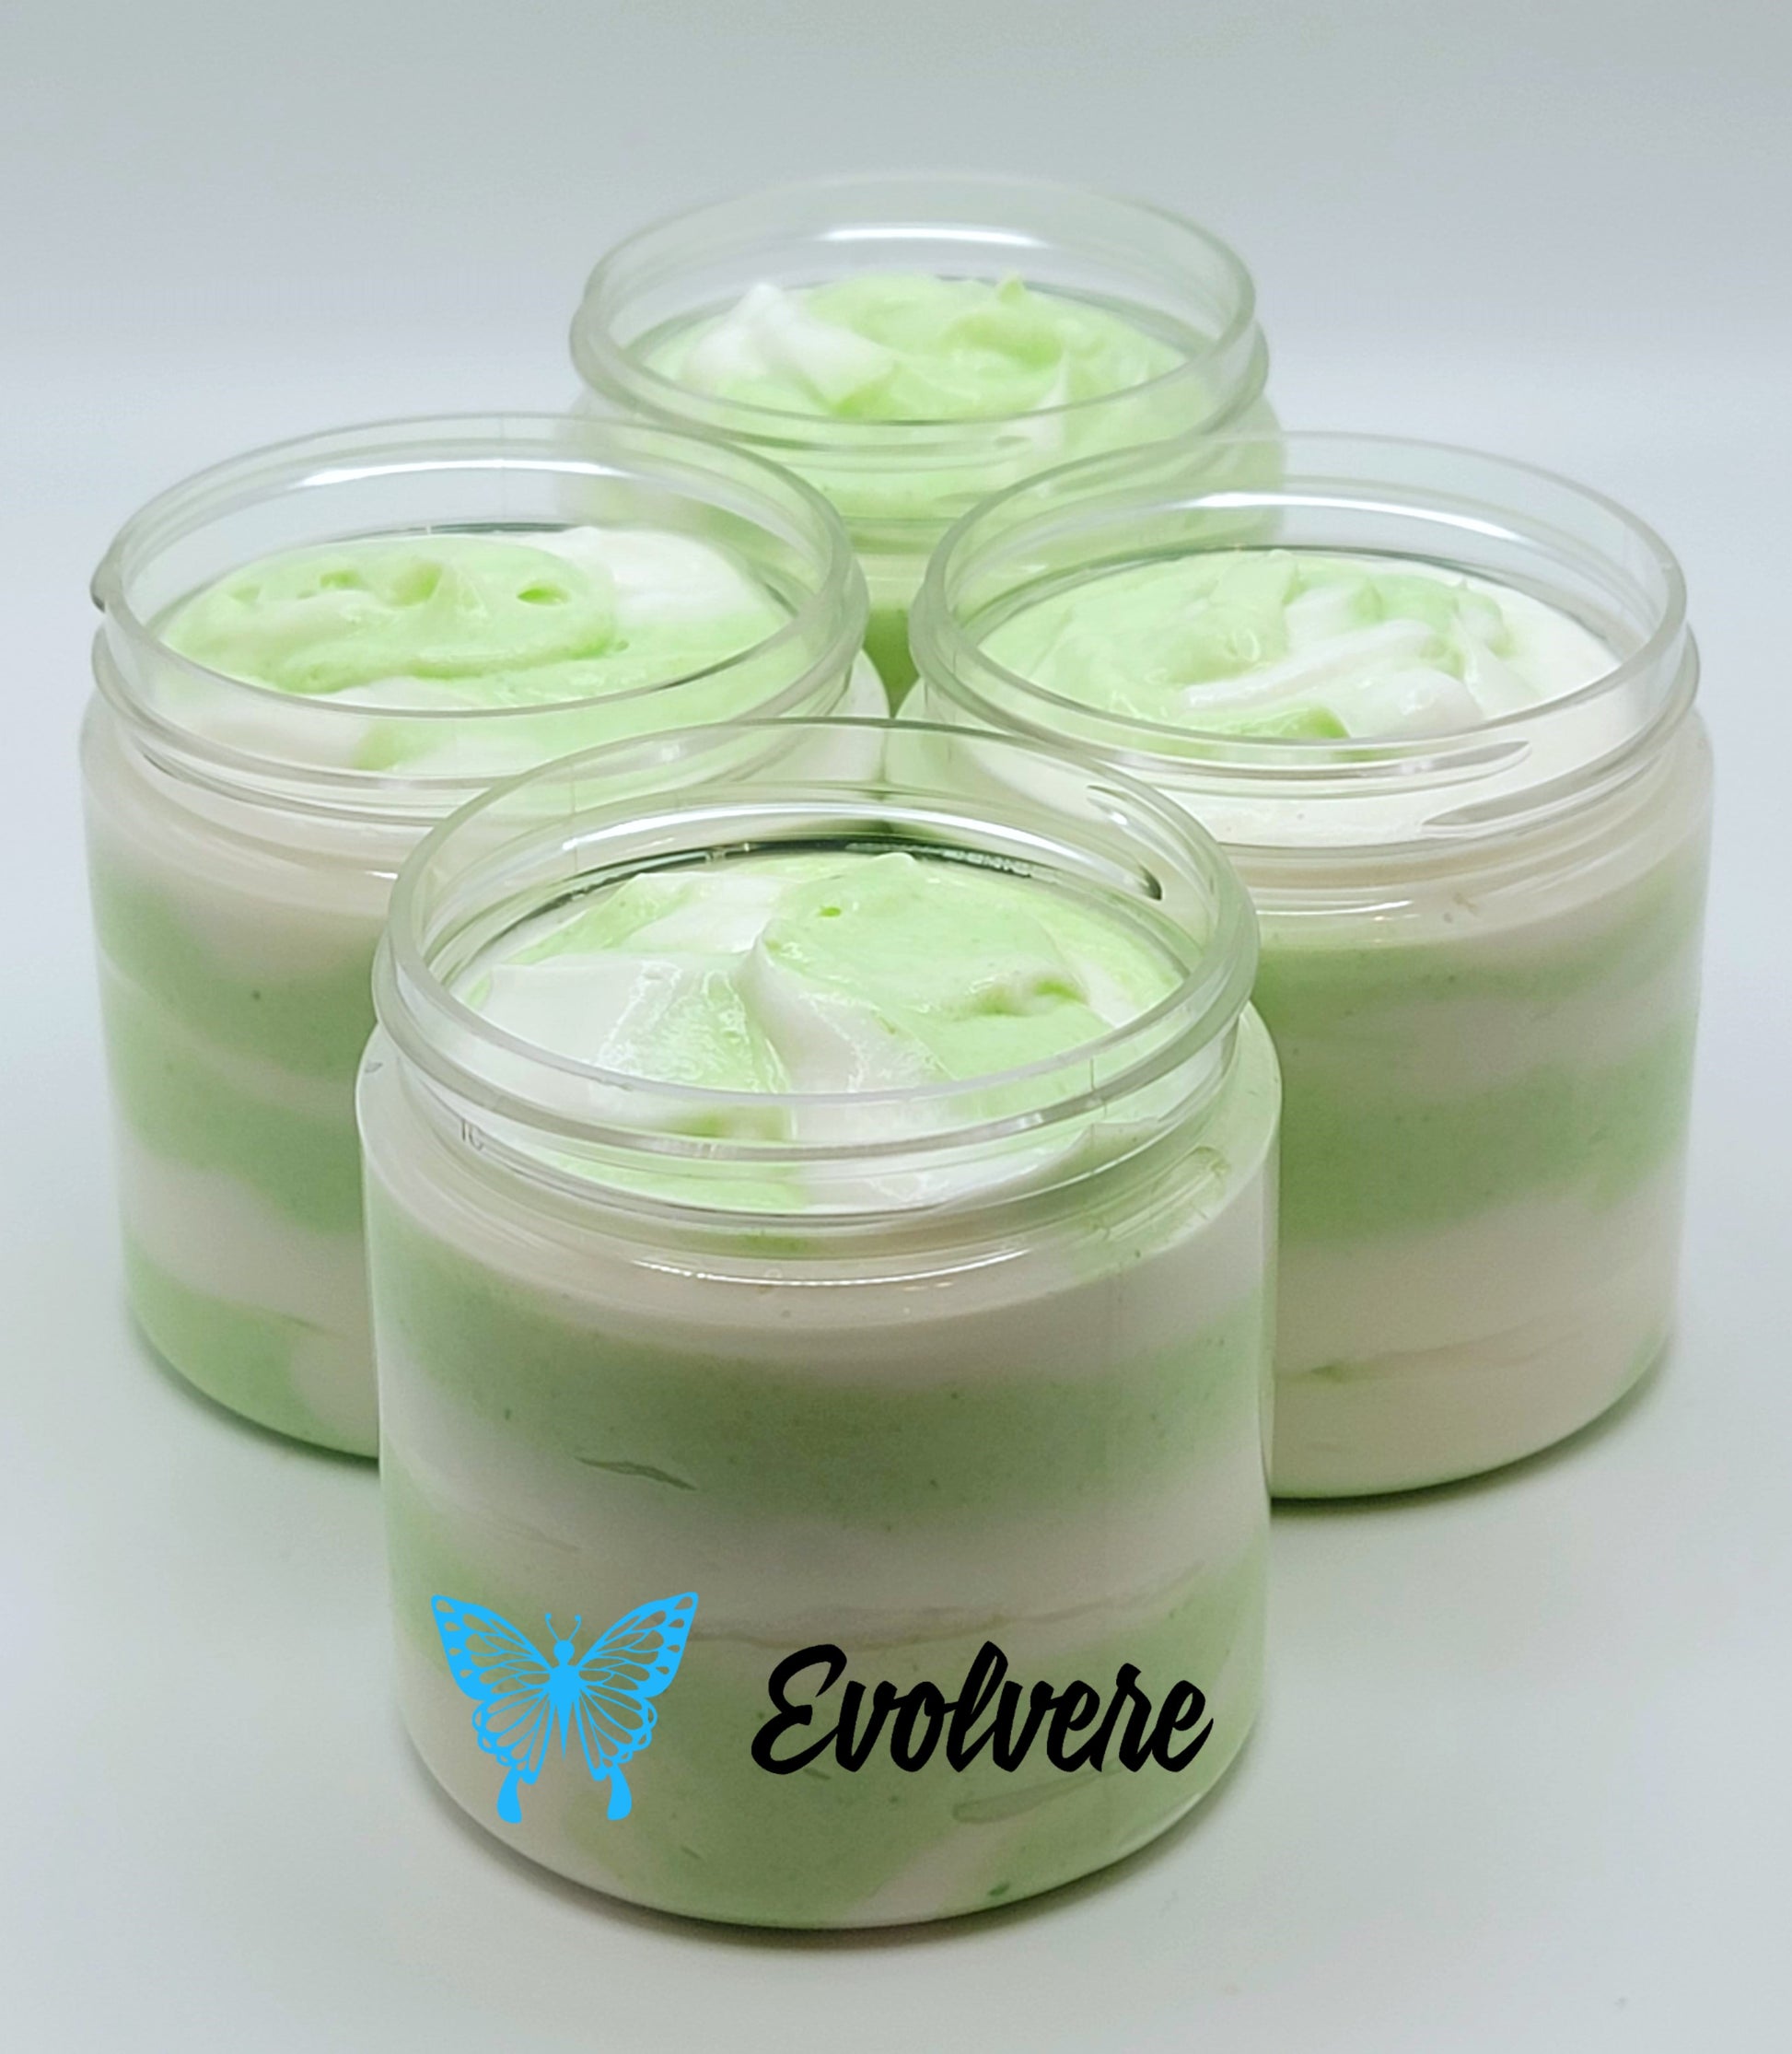 Green and white swirled body butter shown in 4 jars - listing is for 1 jar